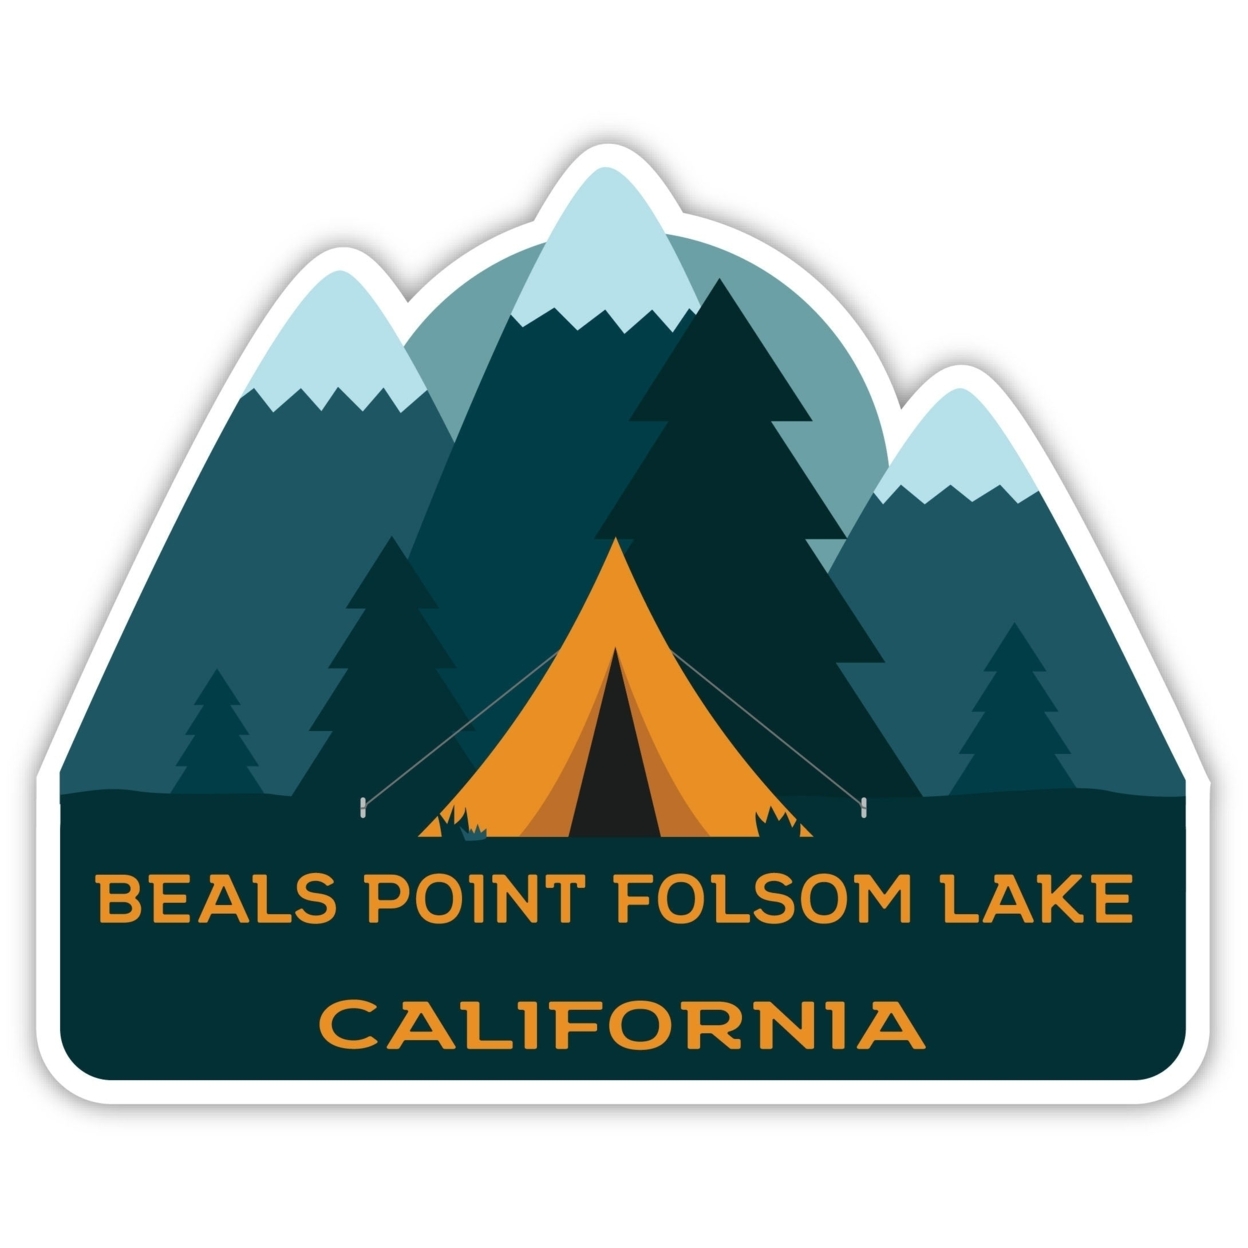 Beals Point Folsom Lake California Souvenir Decorative Stickers (Choose Theme And Size) - 4-Pack, 6-Inch, Tent